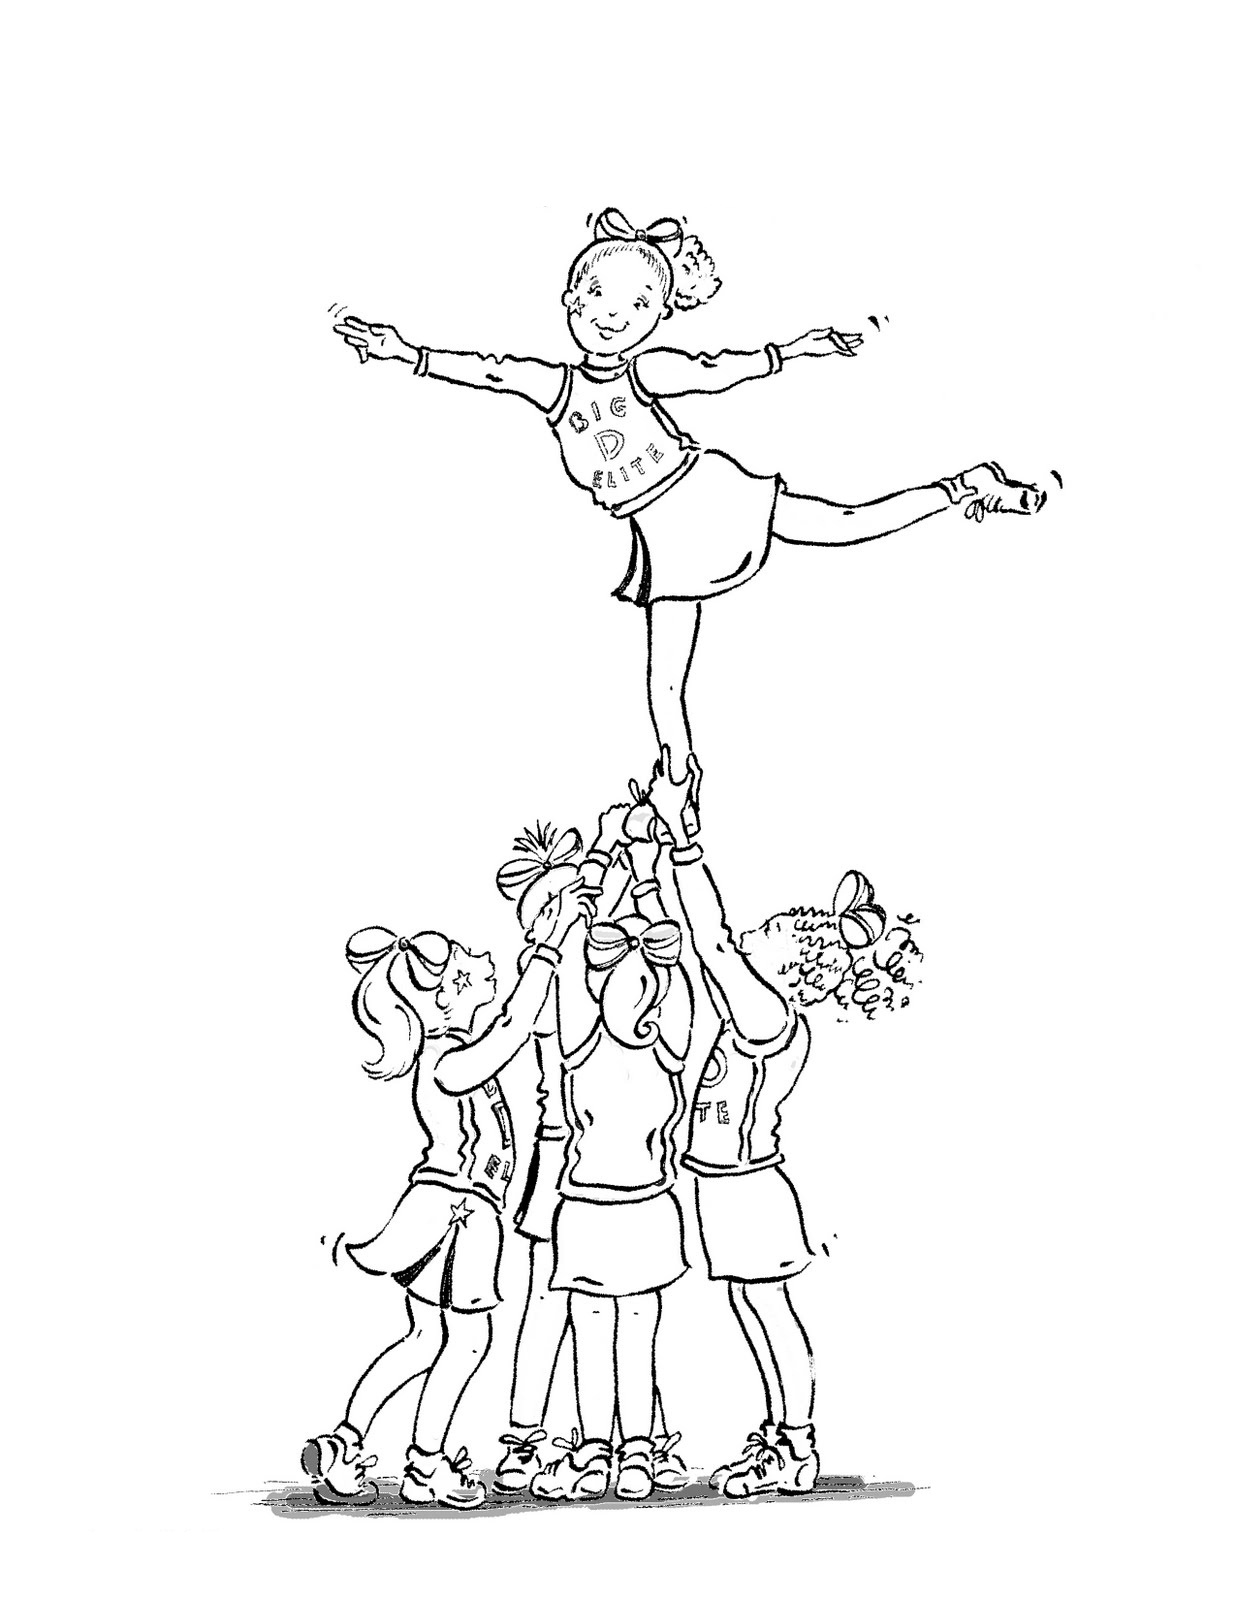 Hello Kitty Cheerleader Coloring Pages - Top 75 Free Printable Hello Kitty Coloring Pages Online Hello Kitty Colouring Pages Kitty Coloring Hello Kitty Coloring